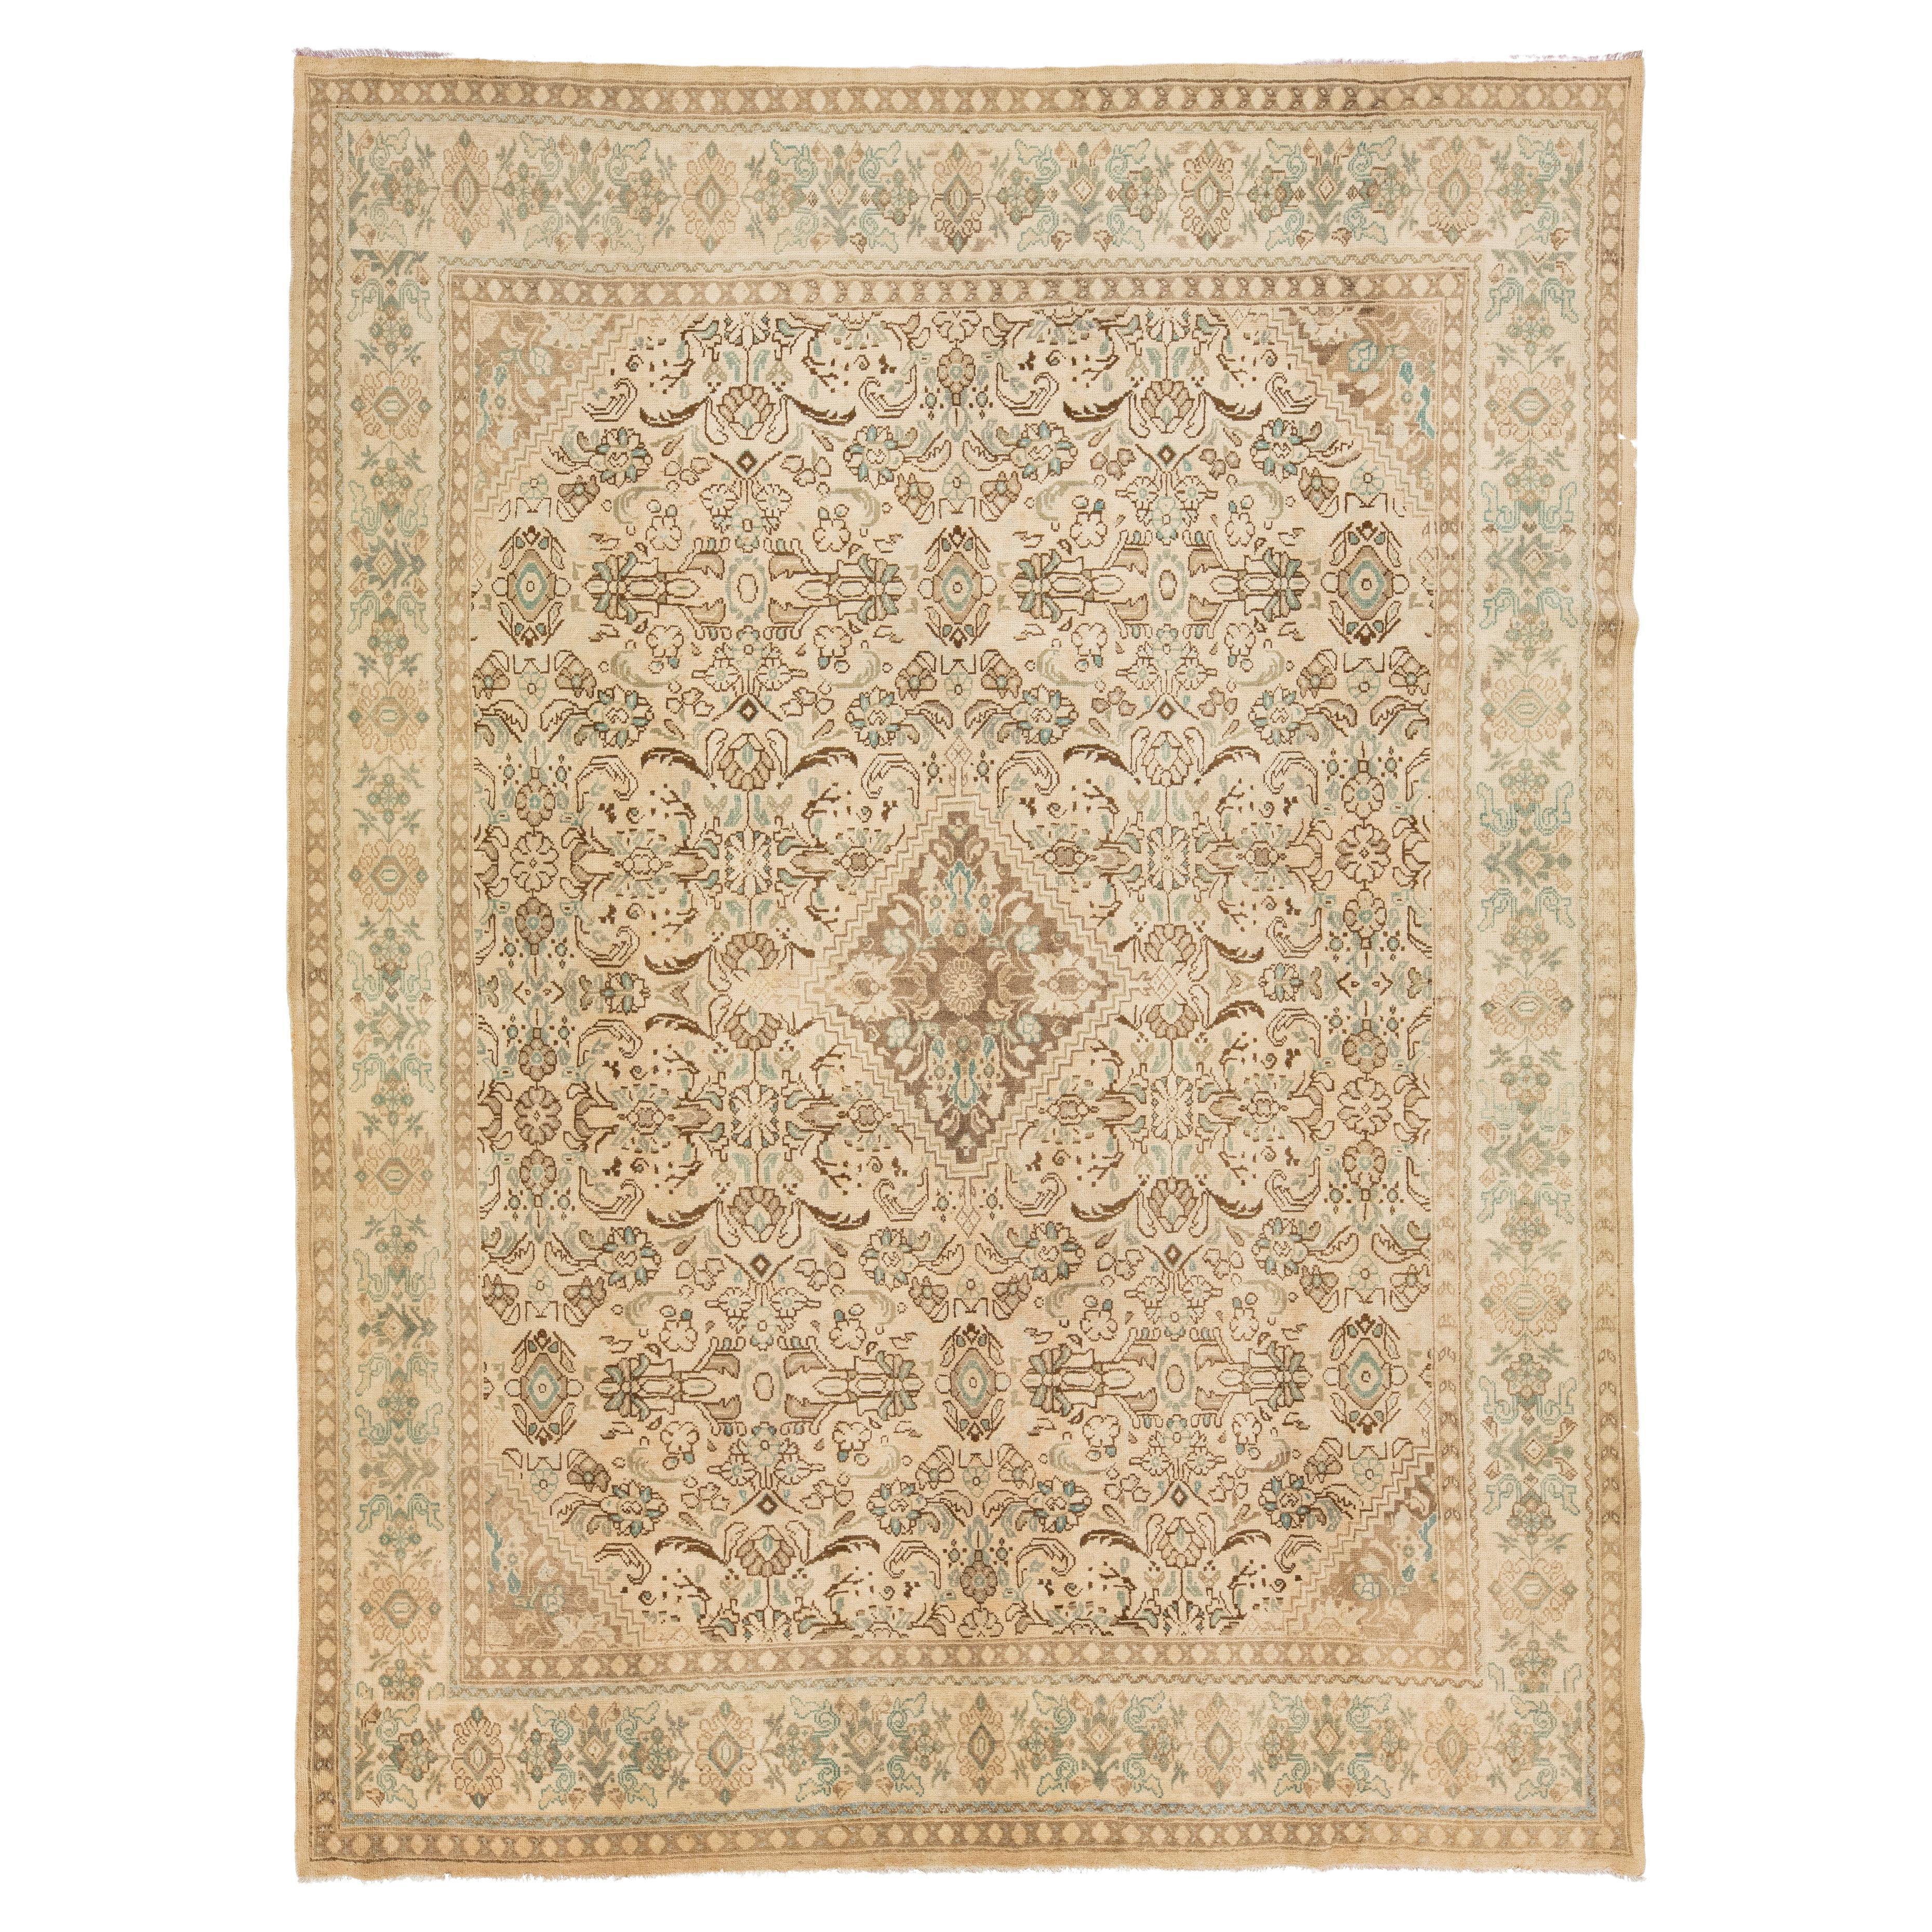 Beige Antique Mahal Wool Rug In Room Size with Floral Design